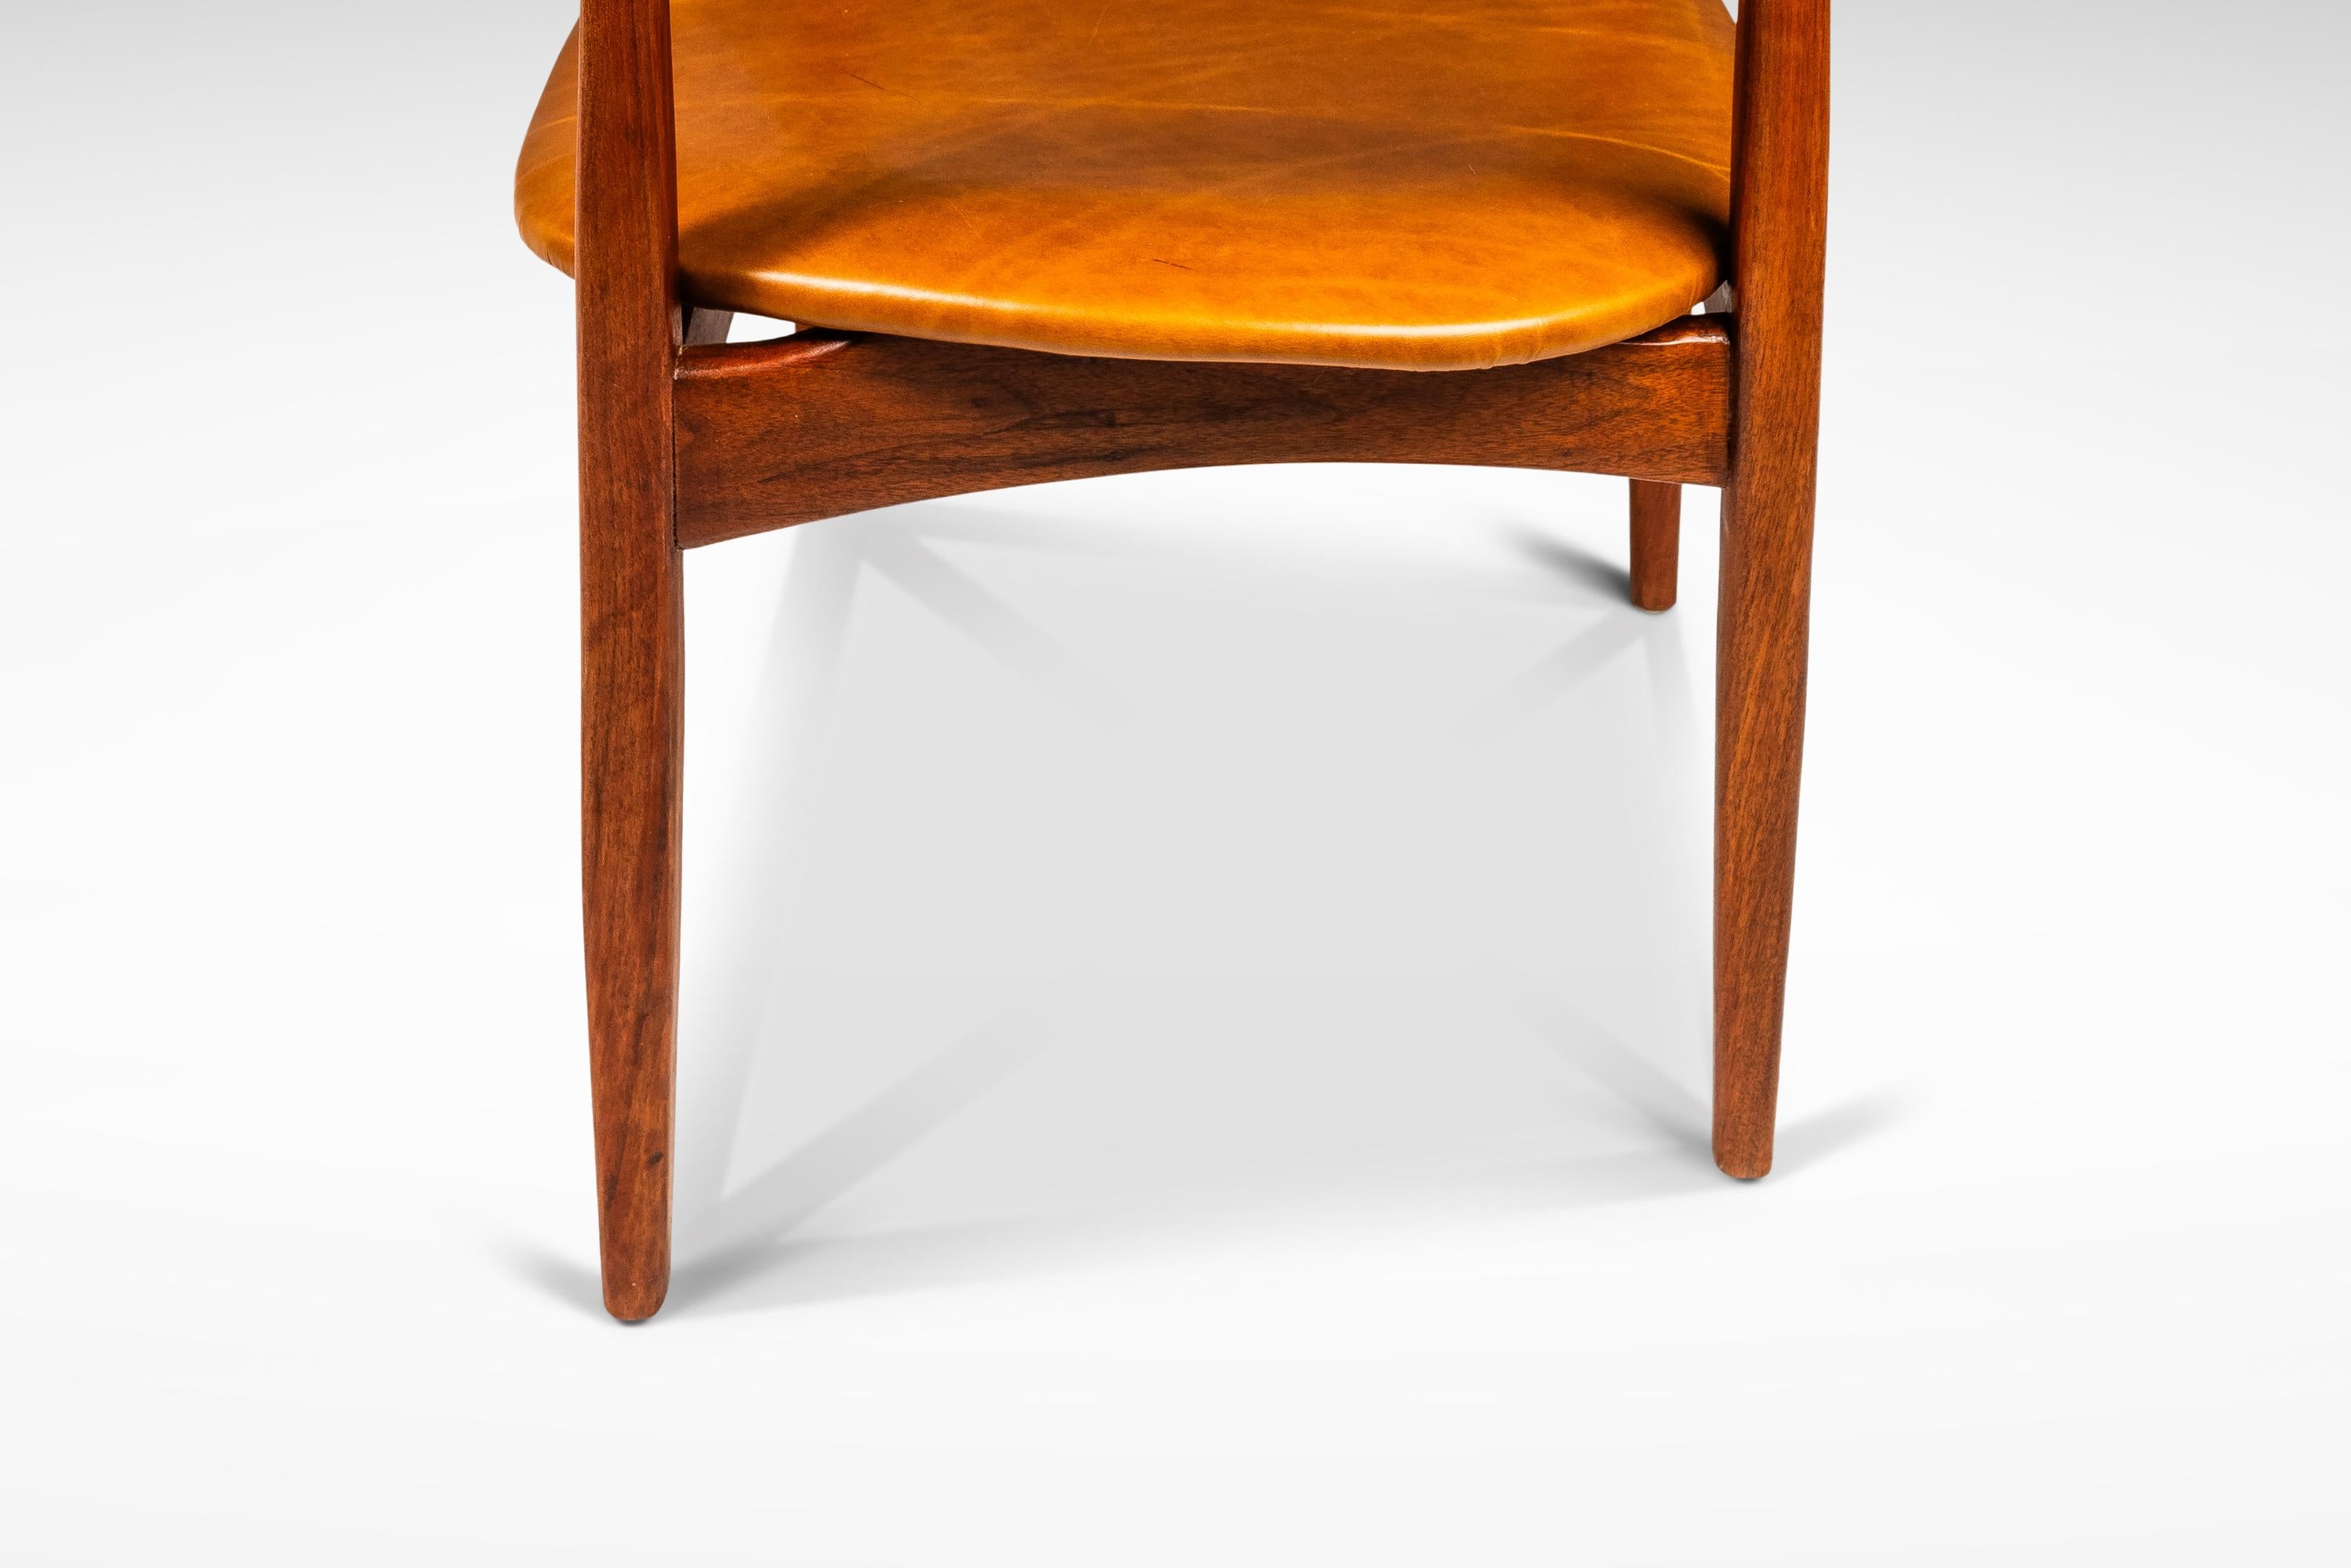 Set of 2 Sculptural Lounge Chairs, Leather & Walnut, Adrian Pearsall Style, 1960 For Sale 13